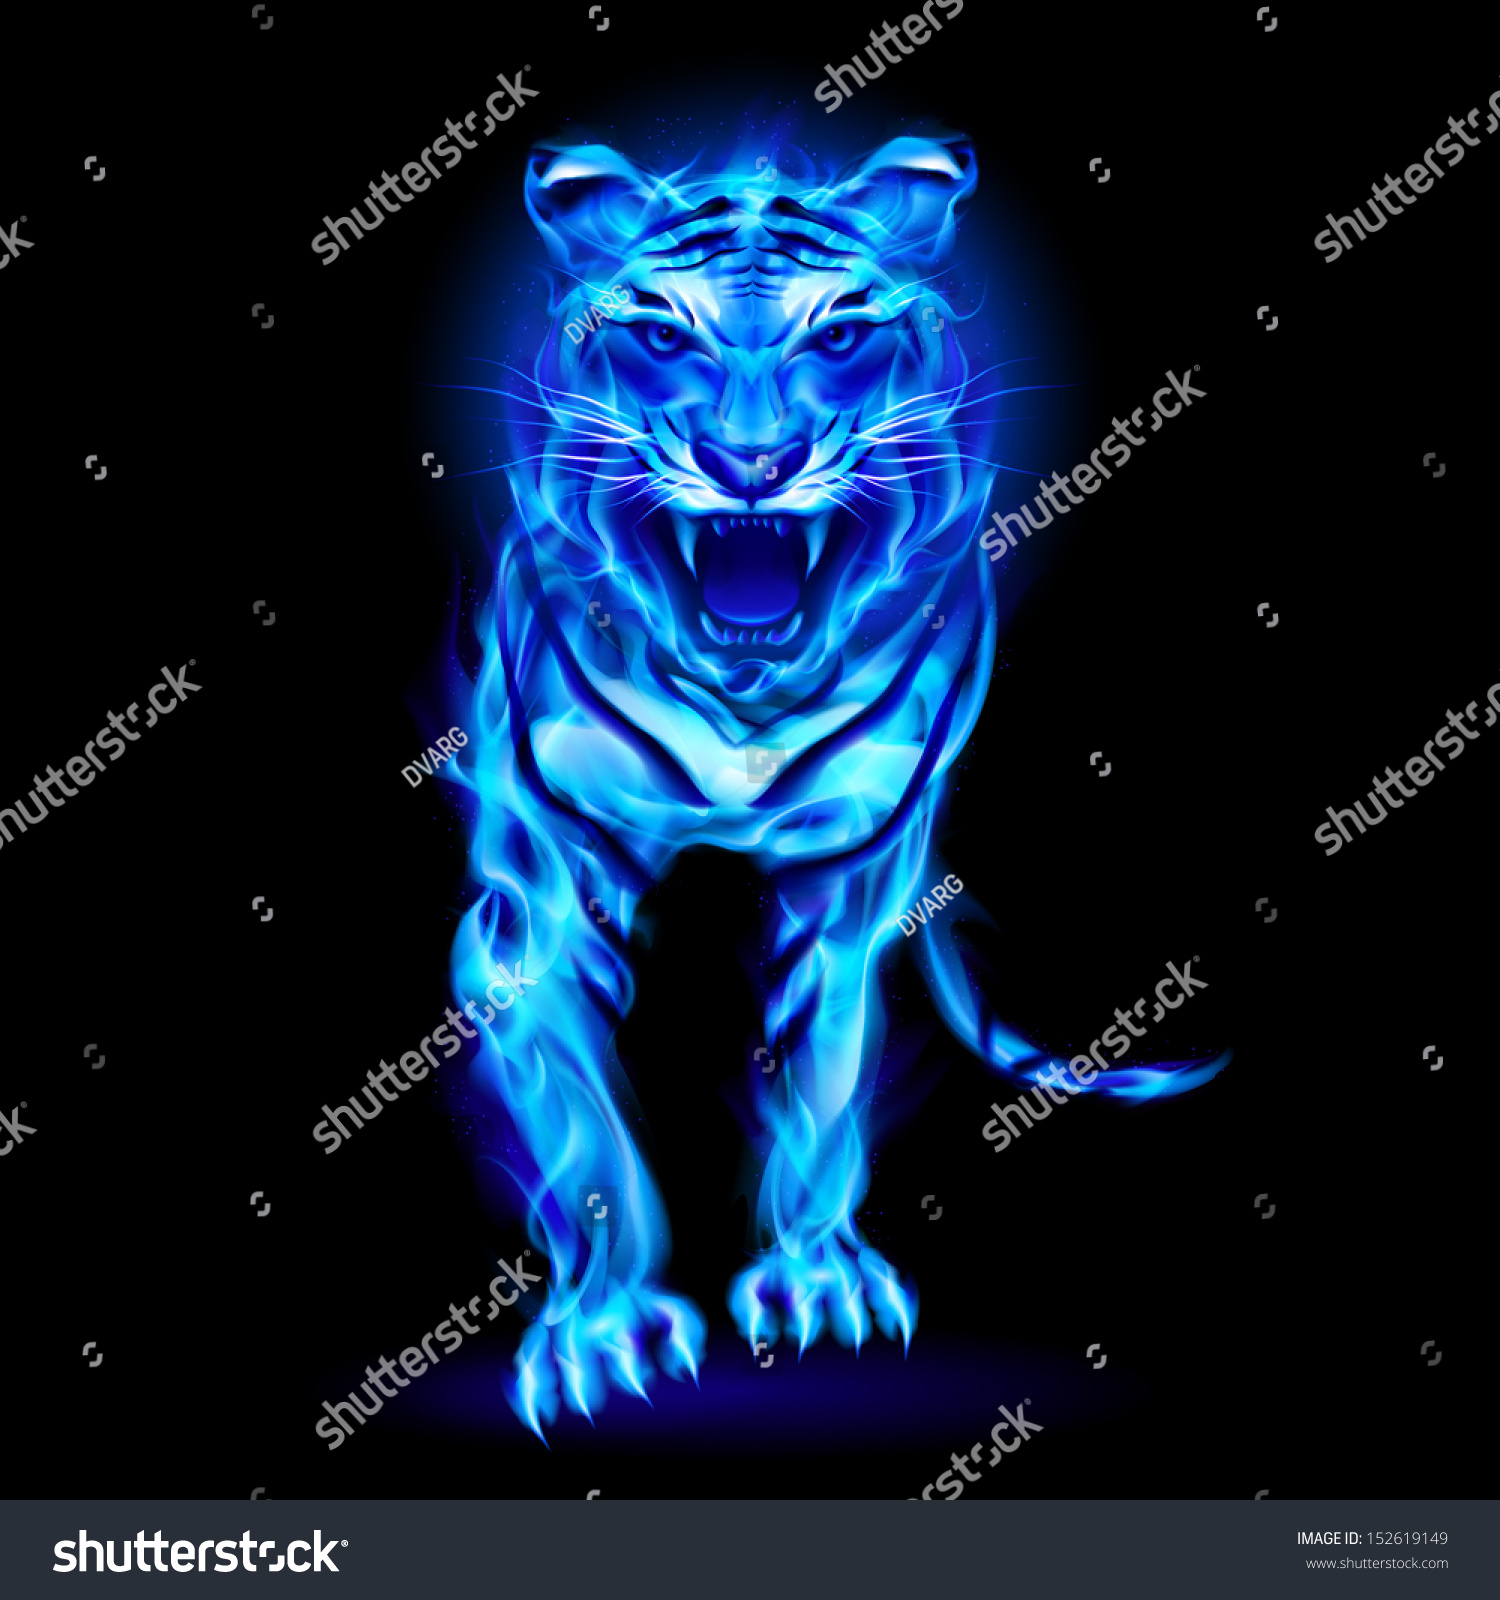 Blue Fire Tiger Isolated On Black Stock Vector 152619149 - Shutterstock